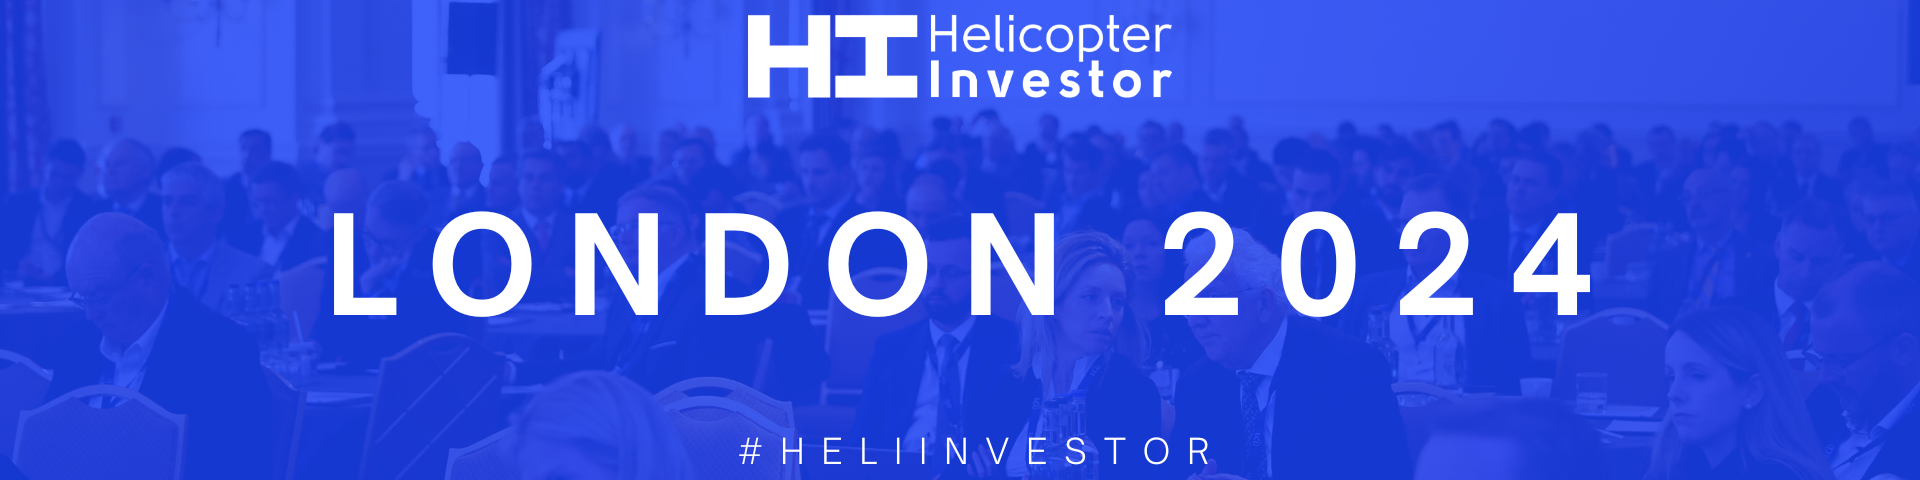 Helicopter Investor London 2024